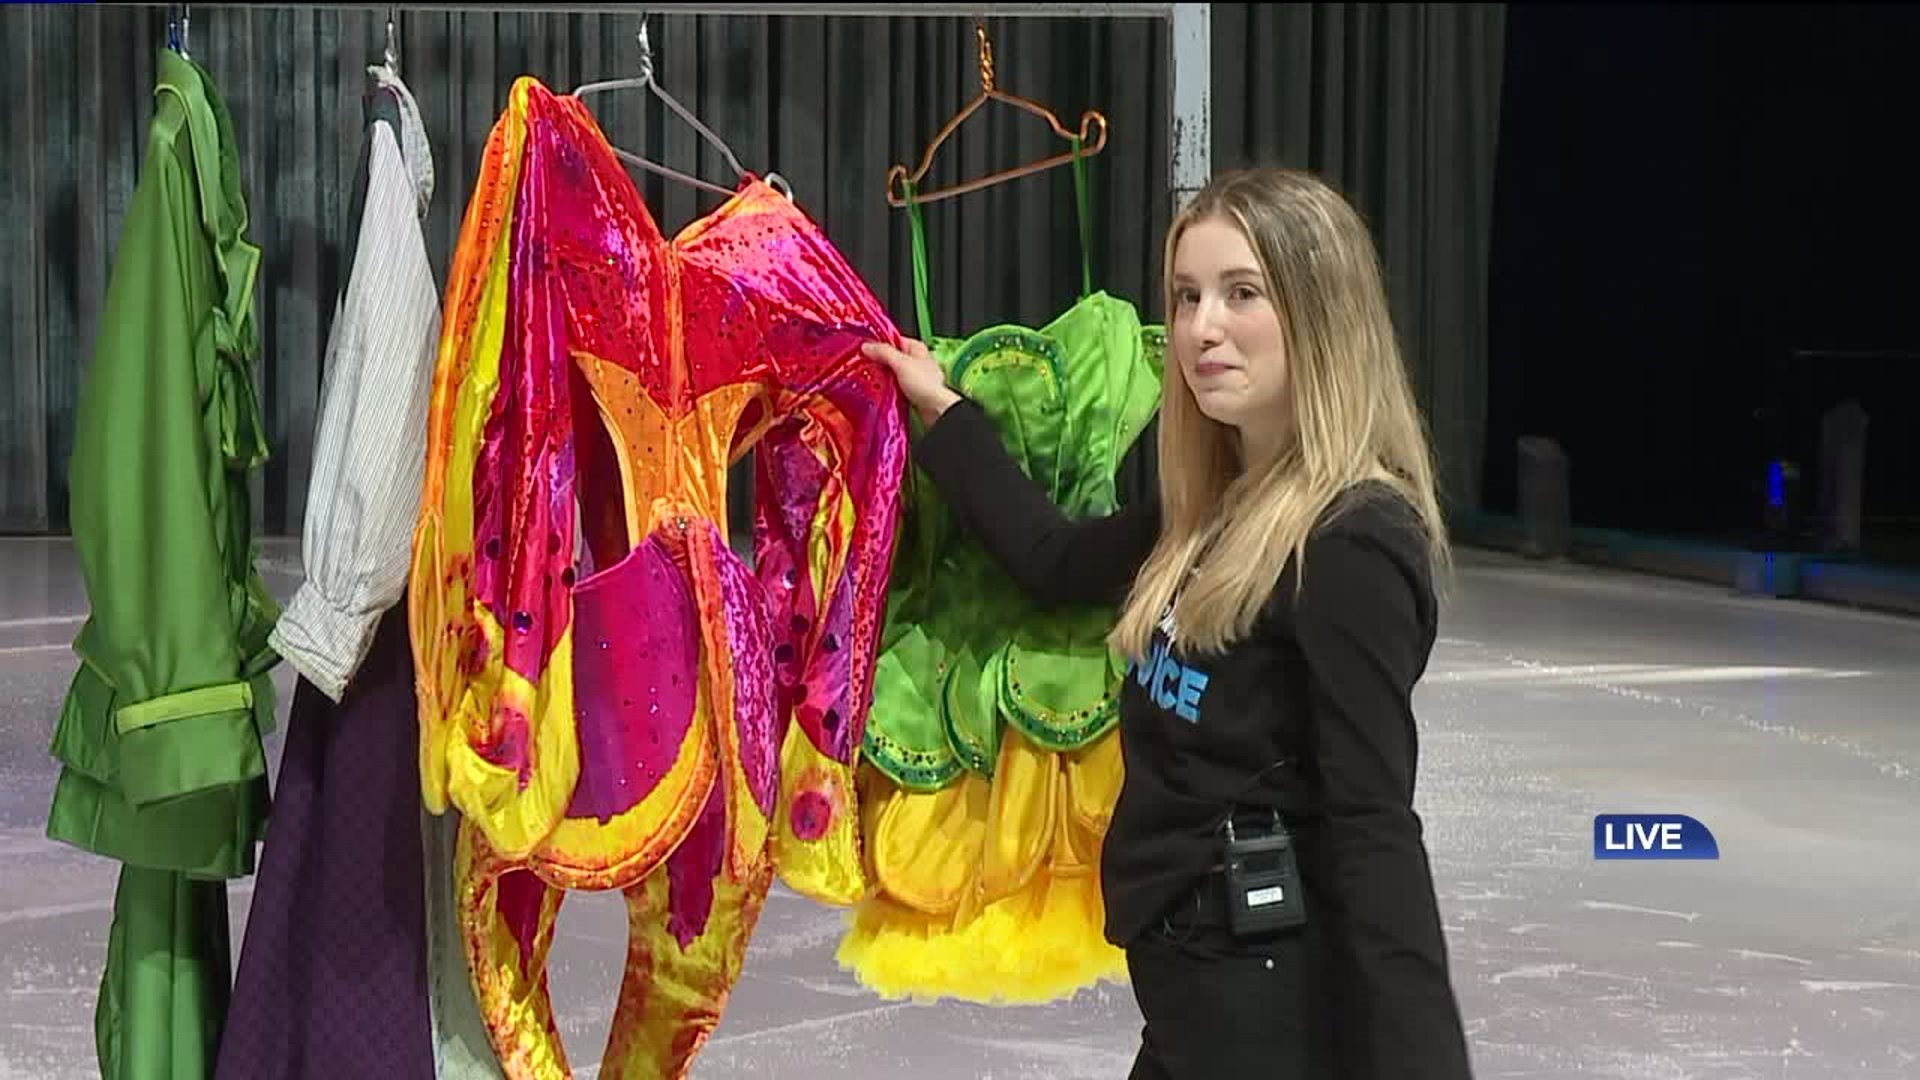 Disney on Ice: A Look at the Costumes